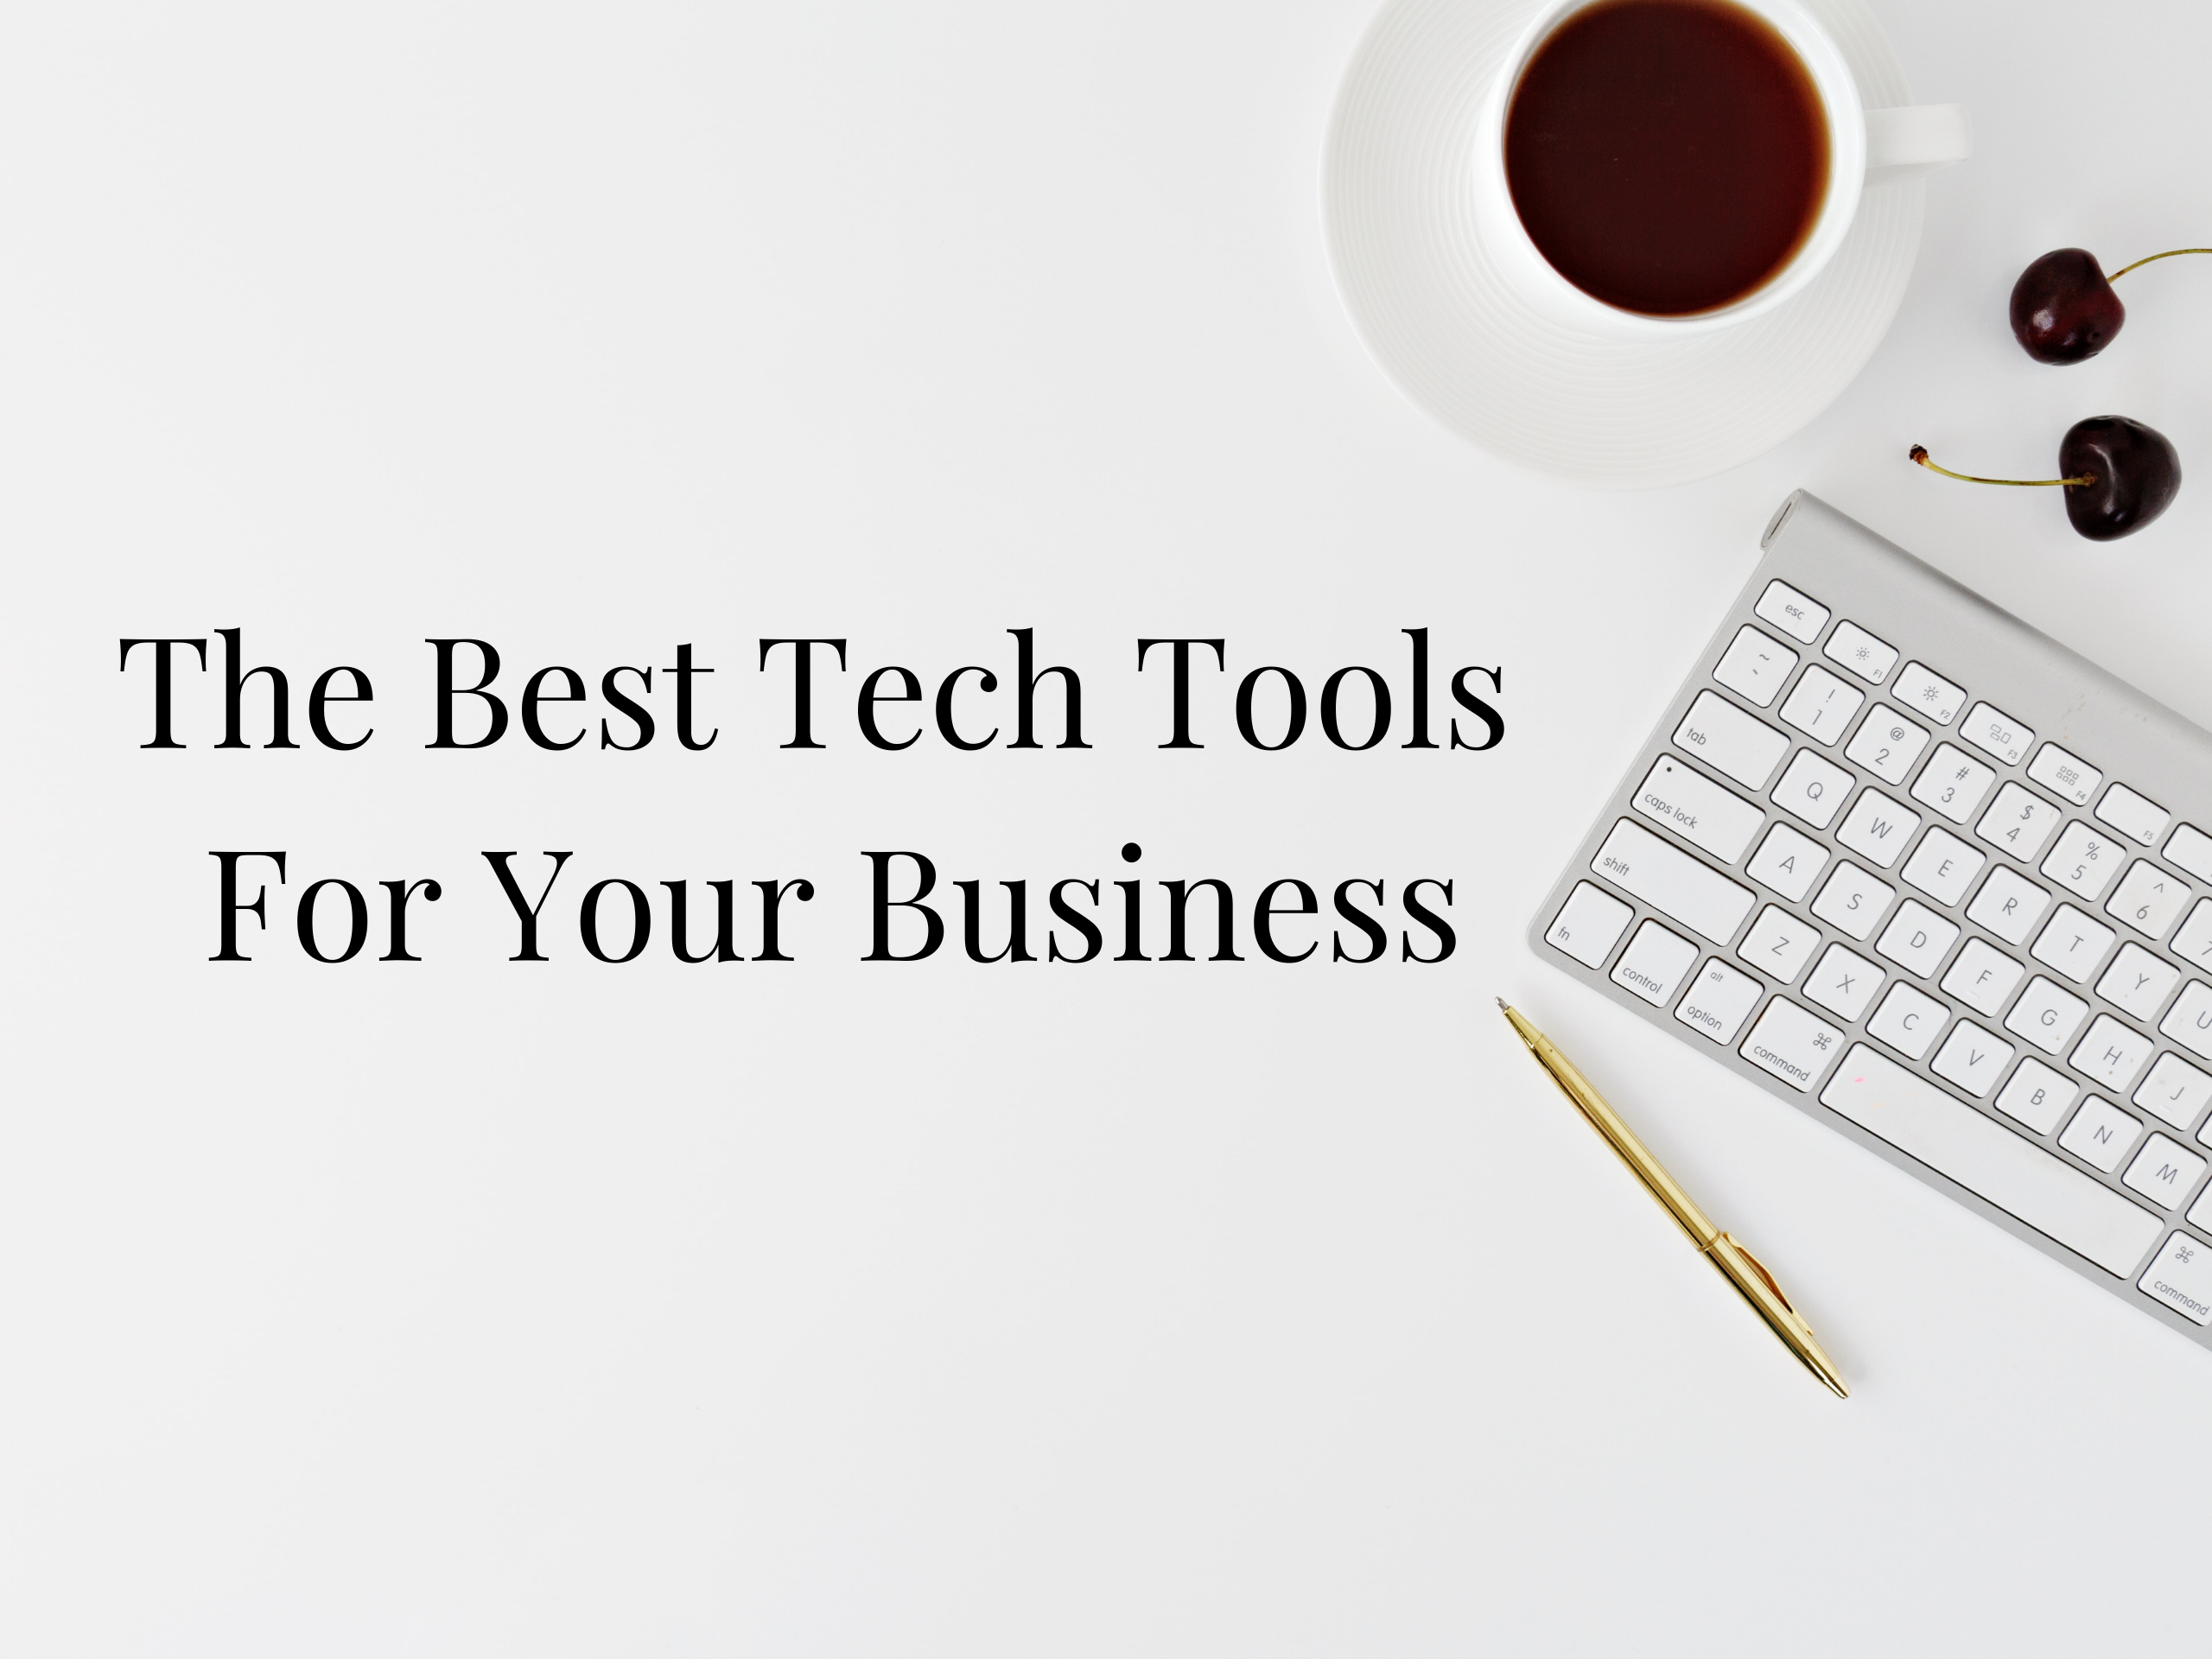 The Best Tech Tools For Businesses